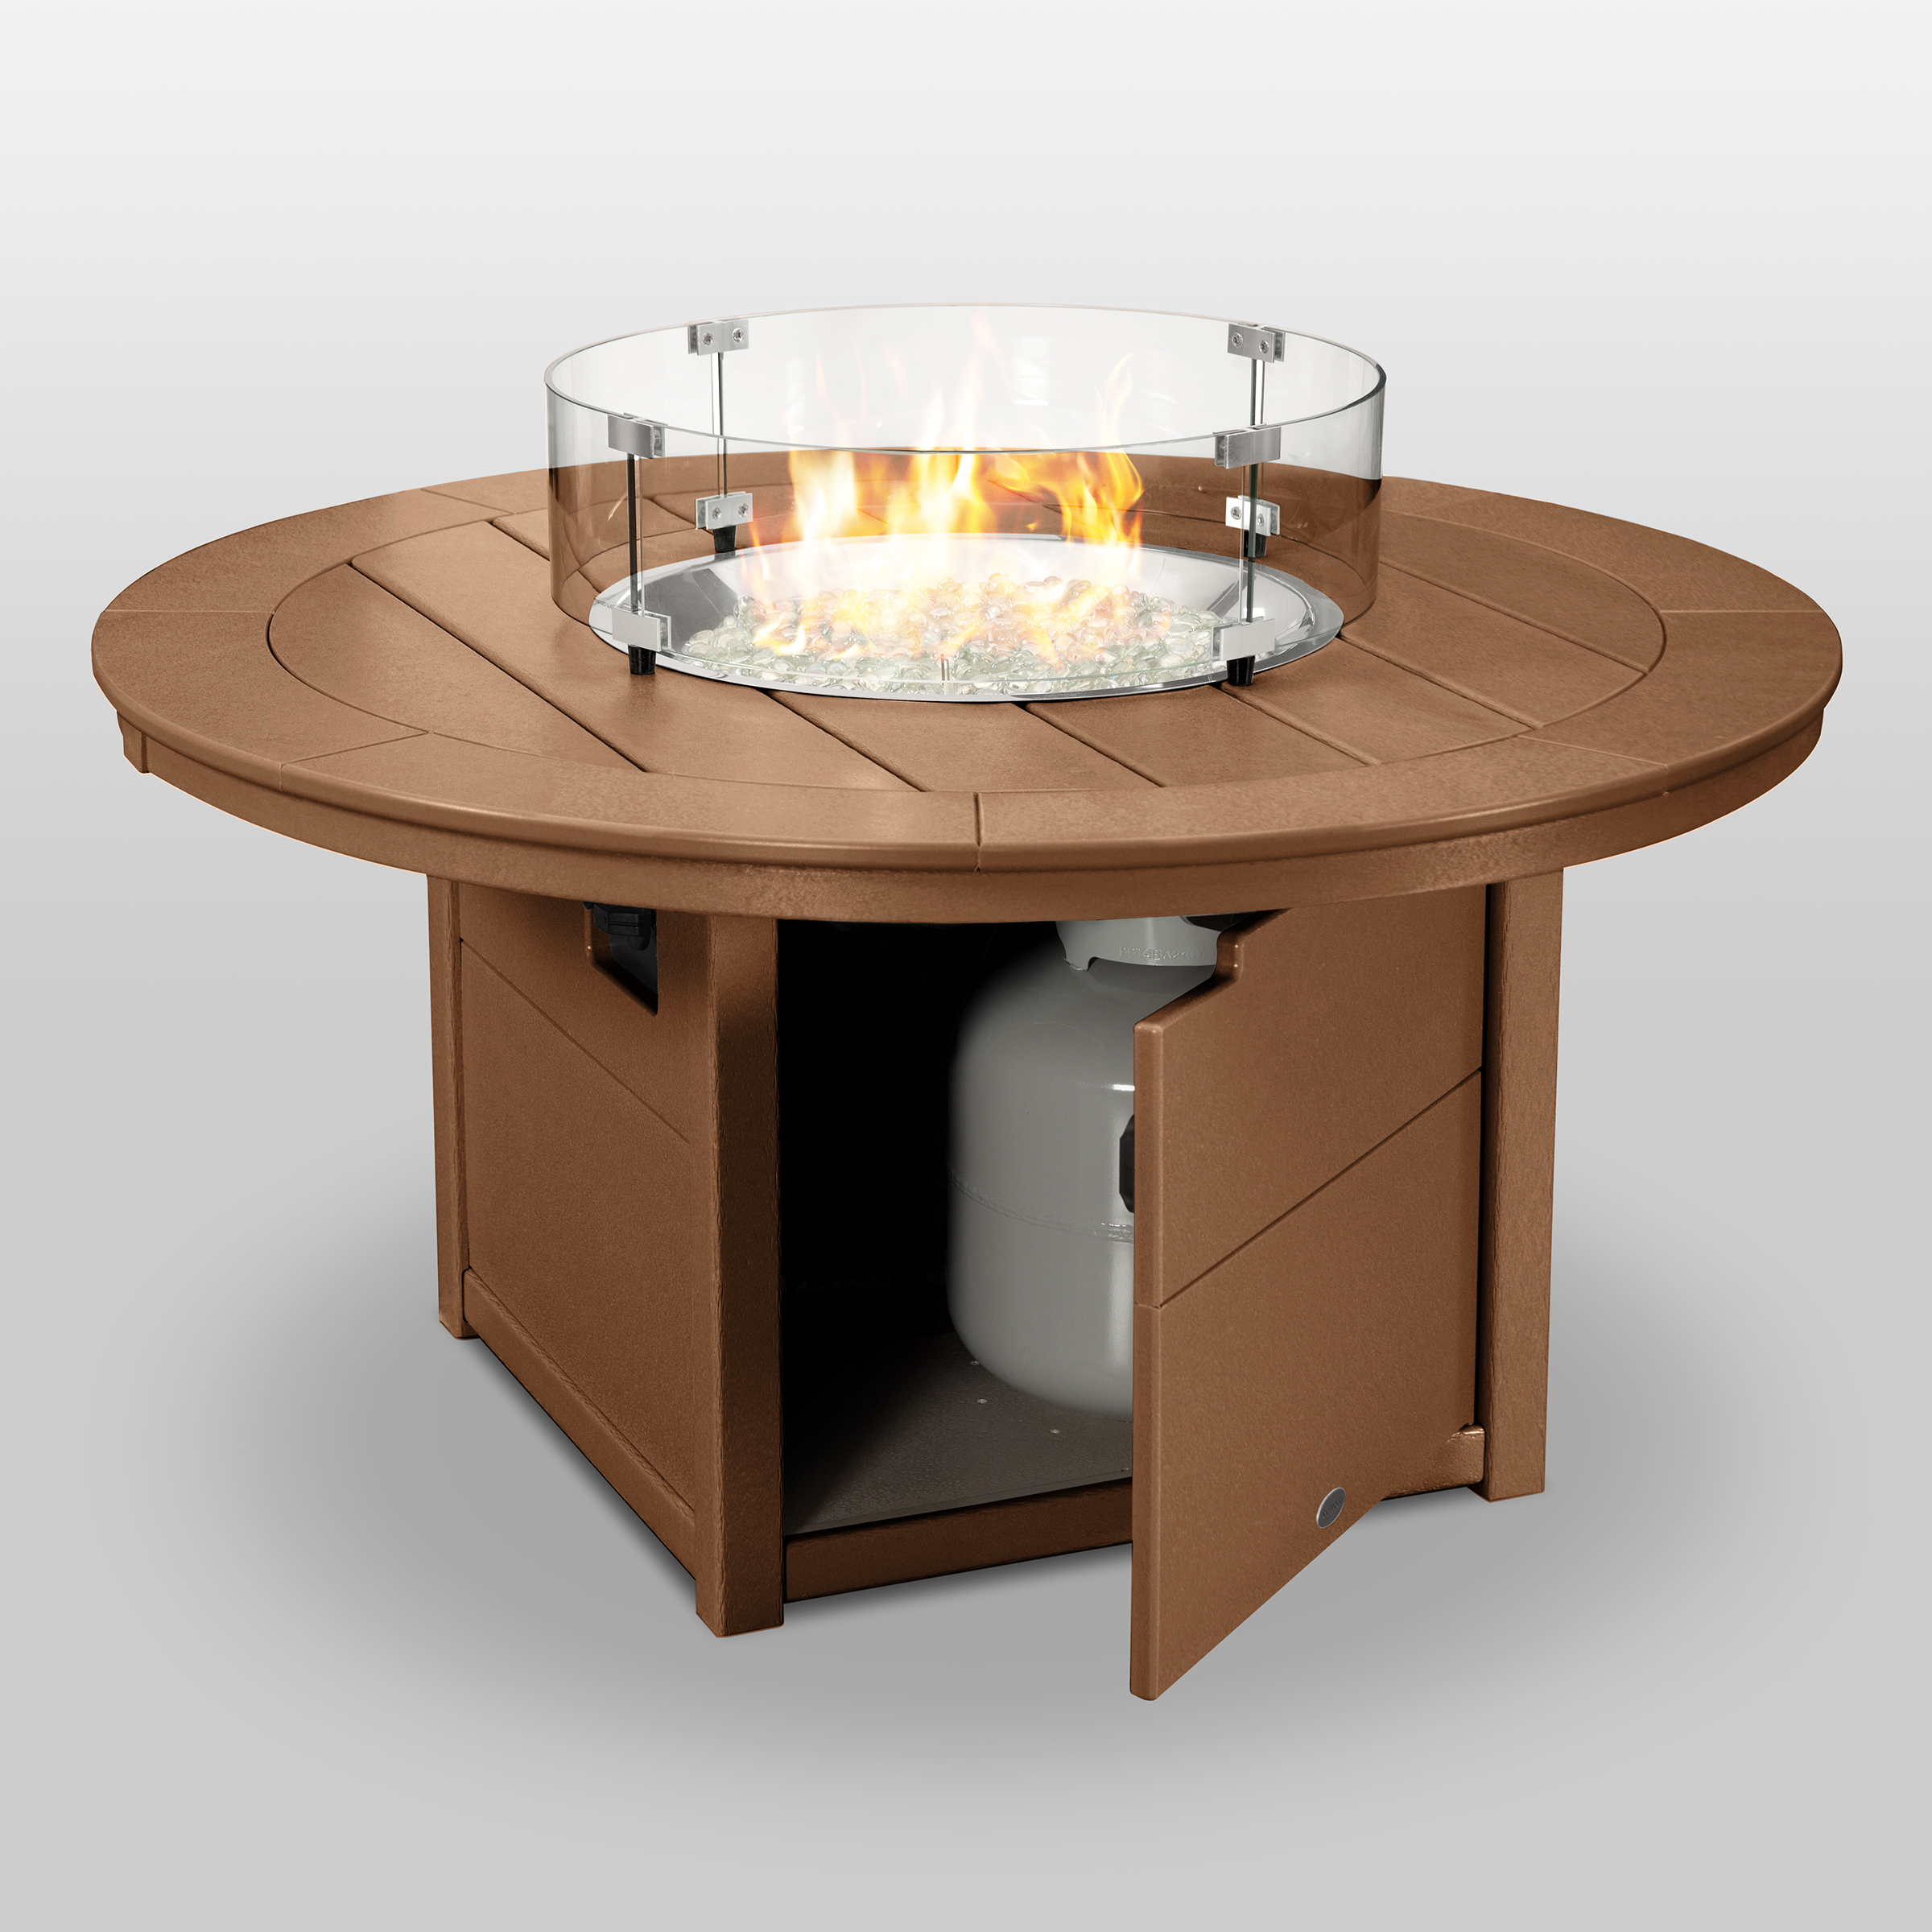 round 48 inch fire pit table in teak product image